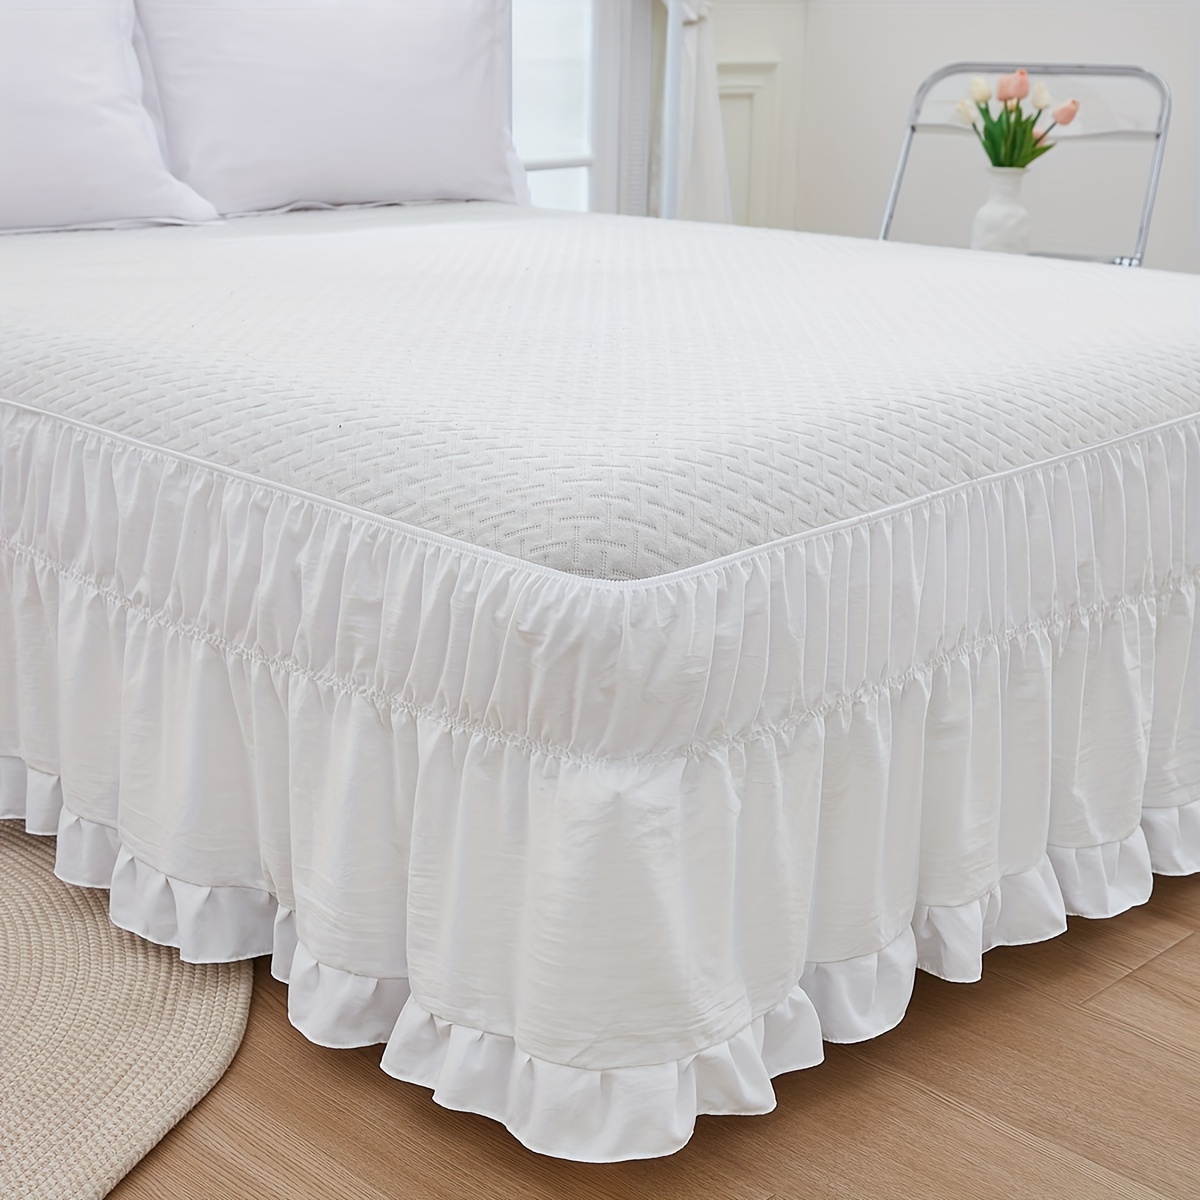 

1pc Bohemian Style White Microfiber Bed Skirt With Lace Surface, Comfortable Soft Bedding For Bedroom Decor